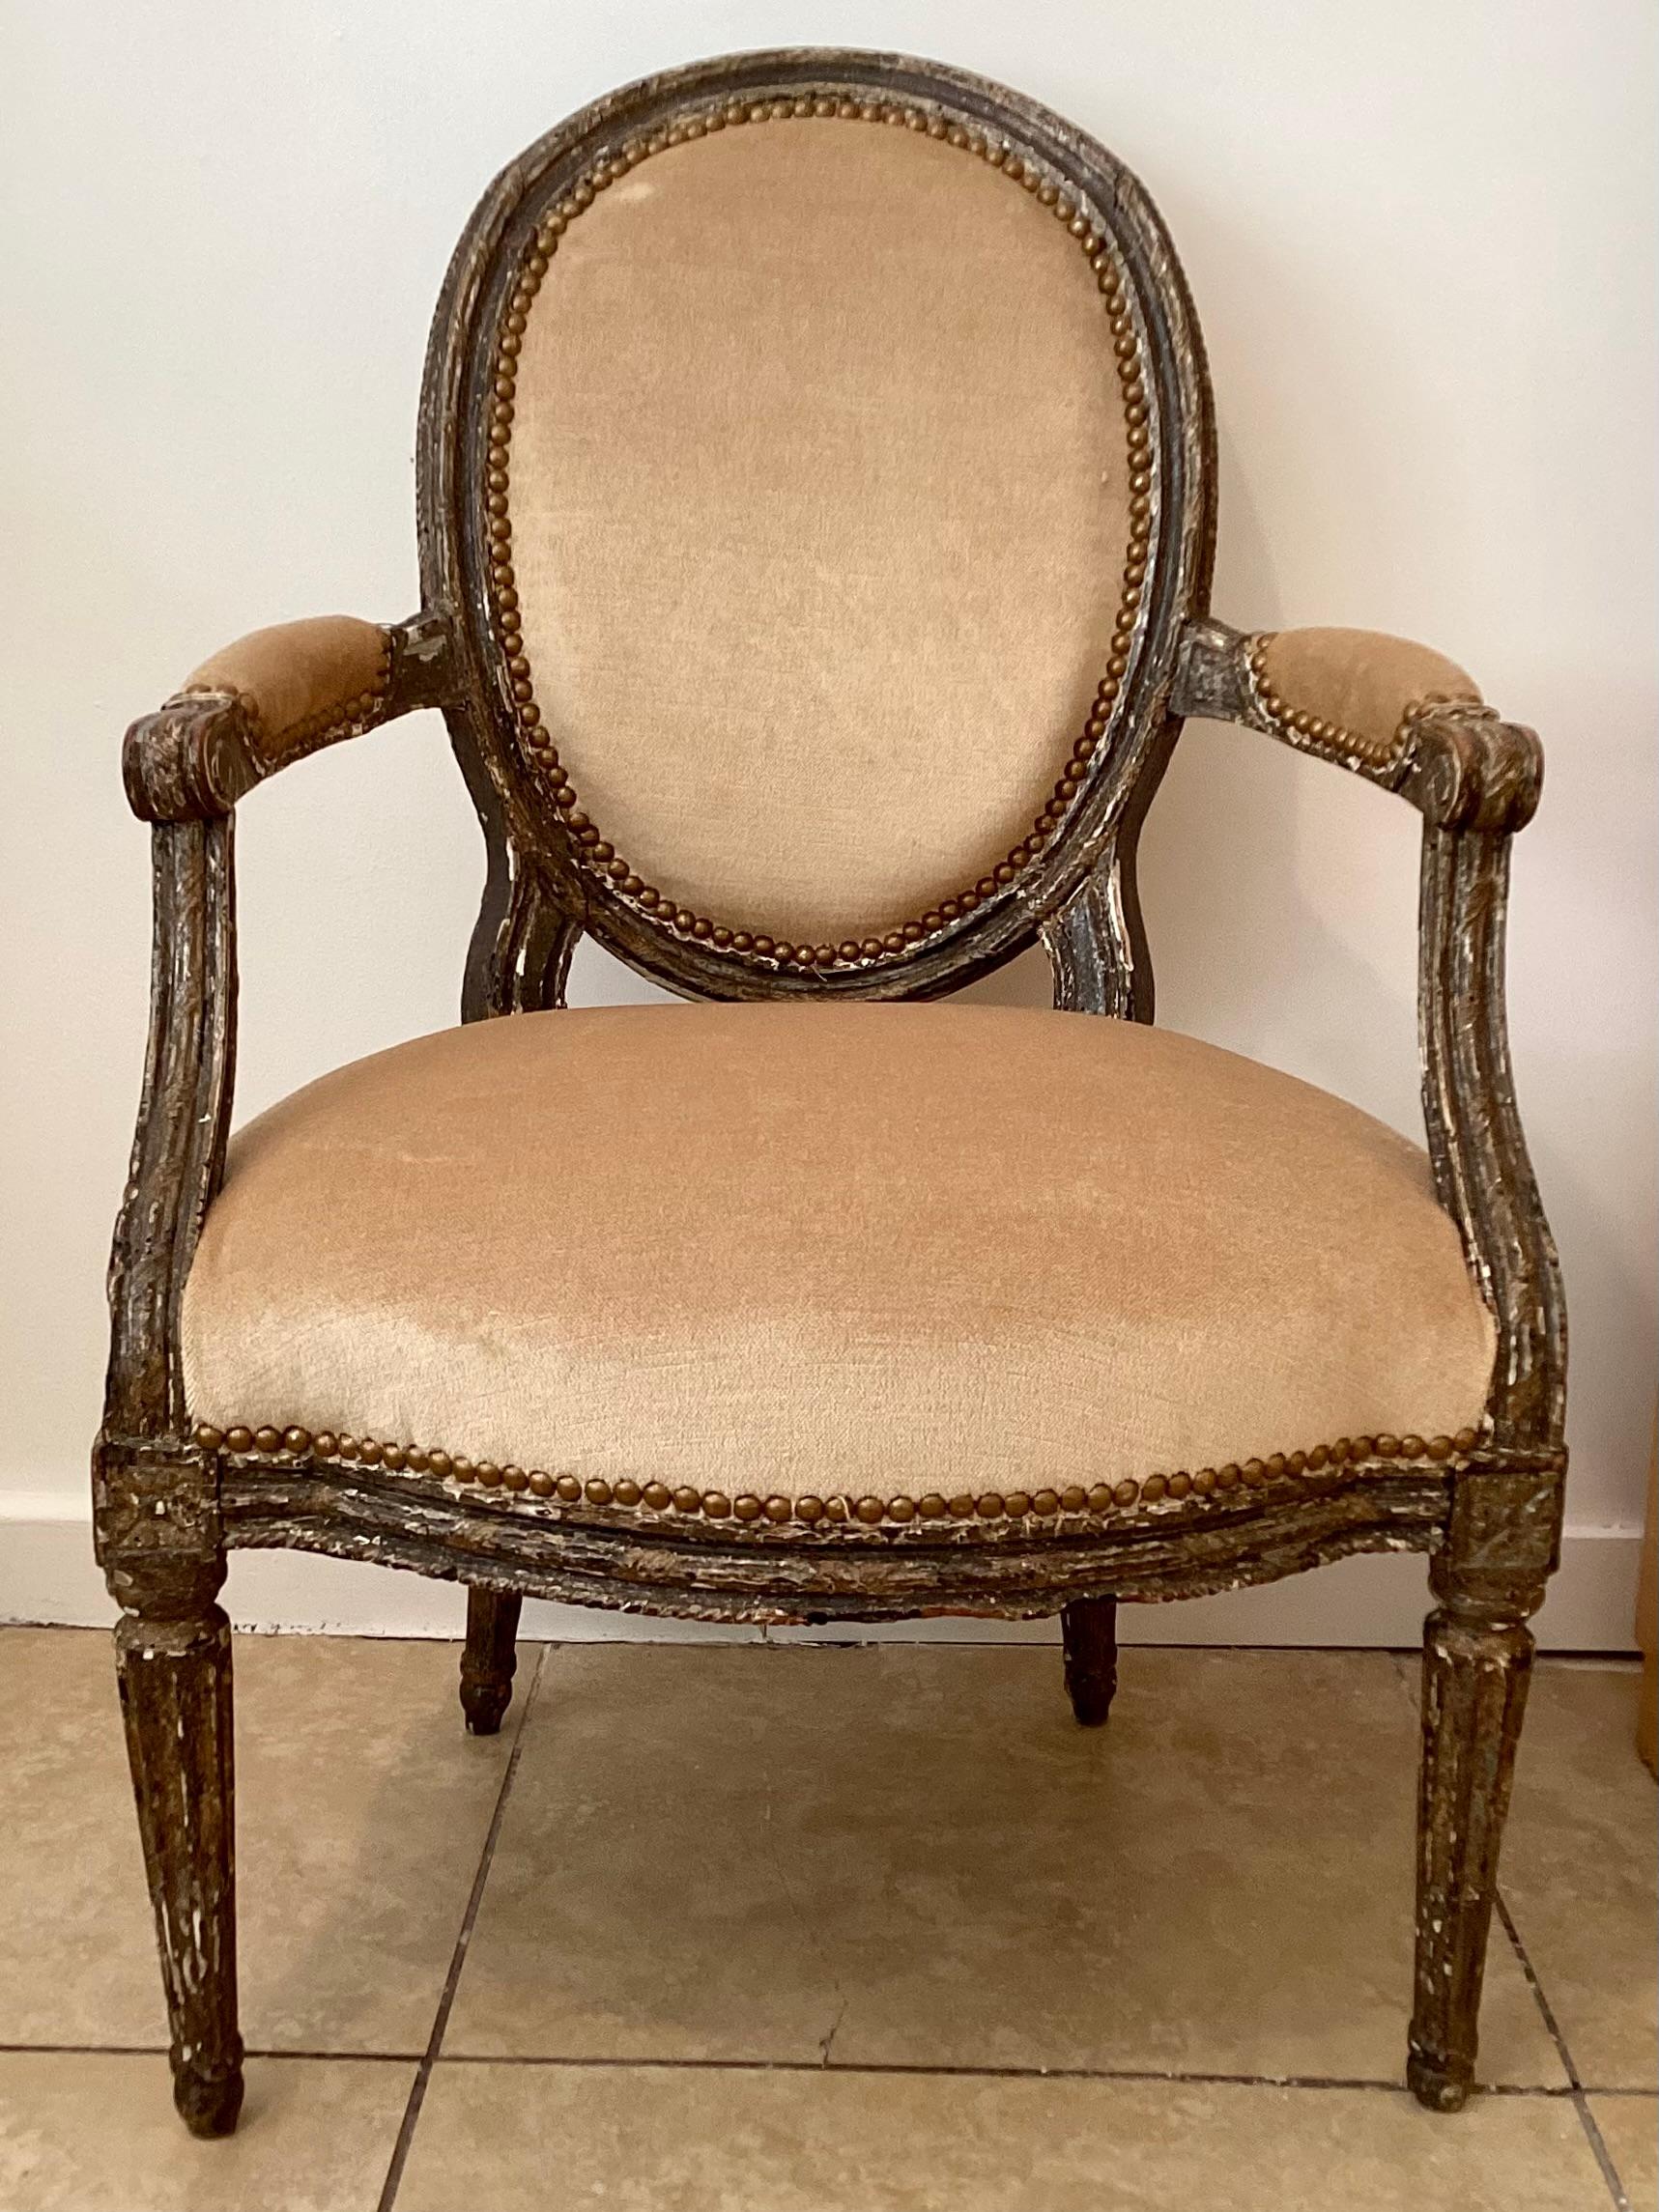 French Provincial Mid-18th Century French Louis XVI Fauteuil in Todd Hase Upholstery For Sale